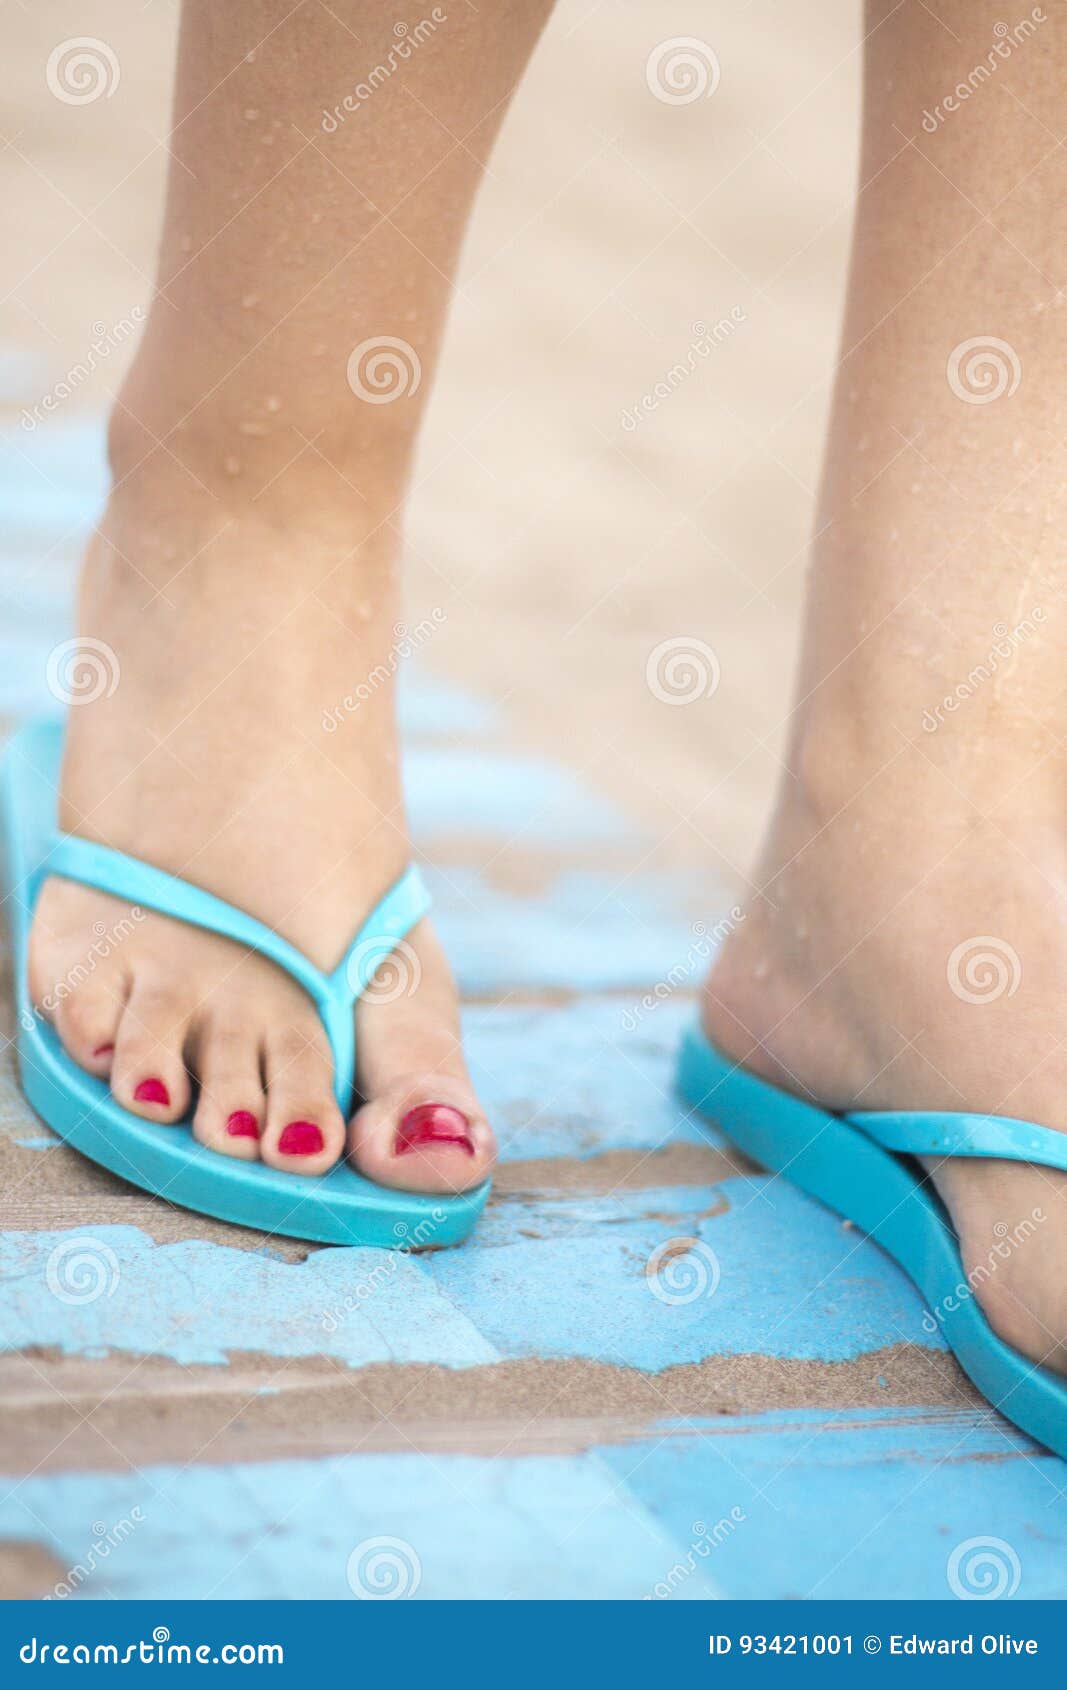 Lady& X27;s Feet in Sandals on Beach Stock Image - Image of blue